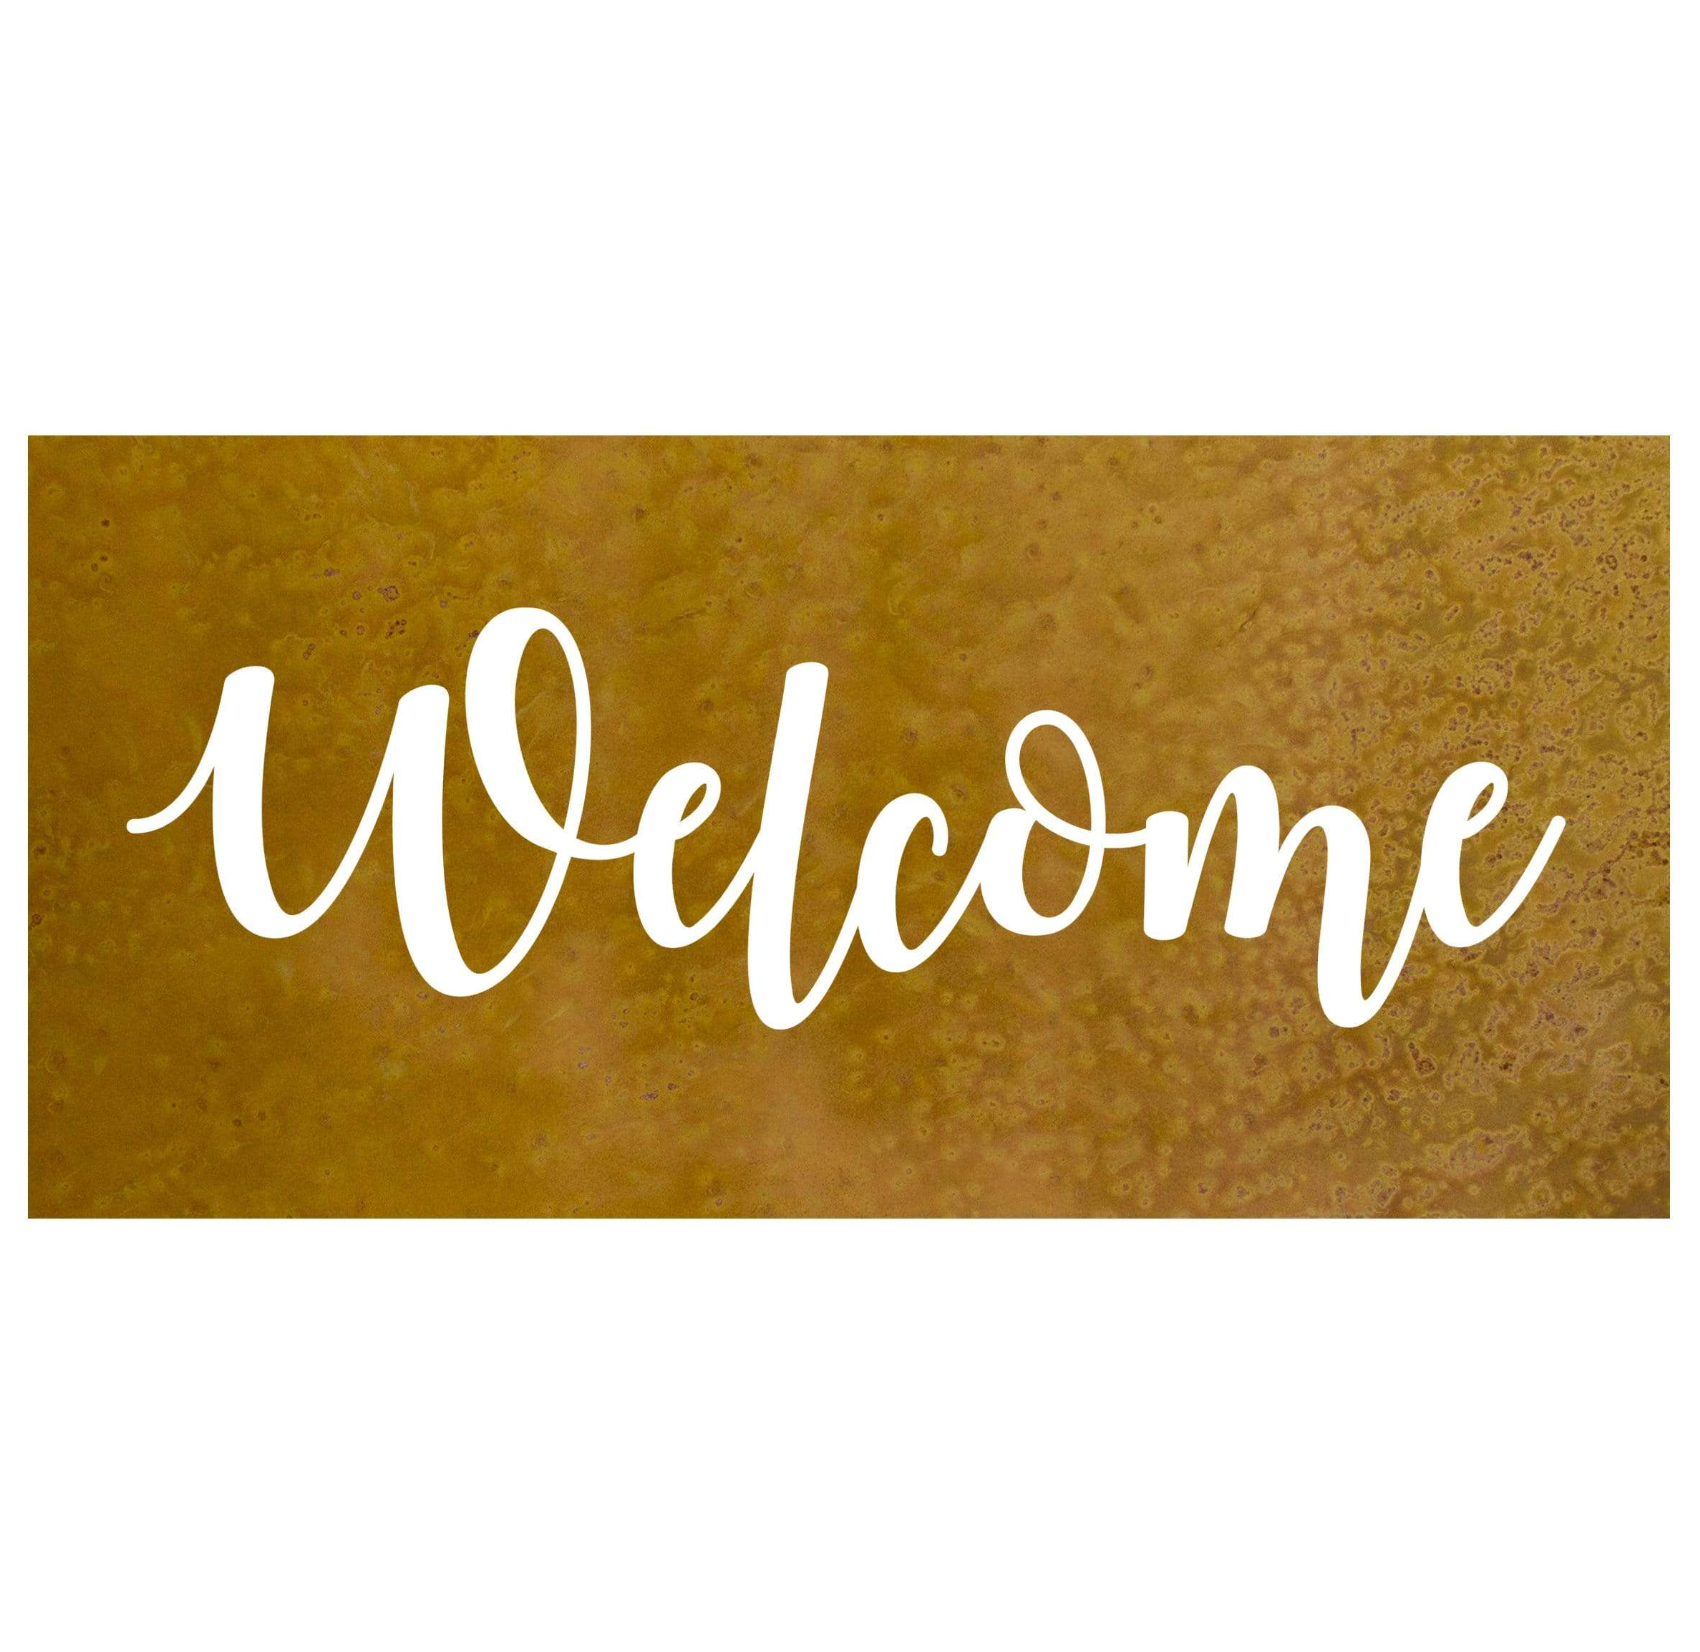 "Welcome" Wall Art - Heart of the Home PA